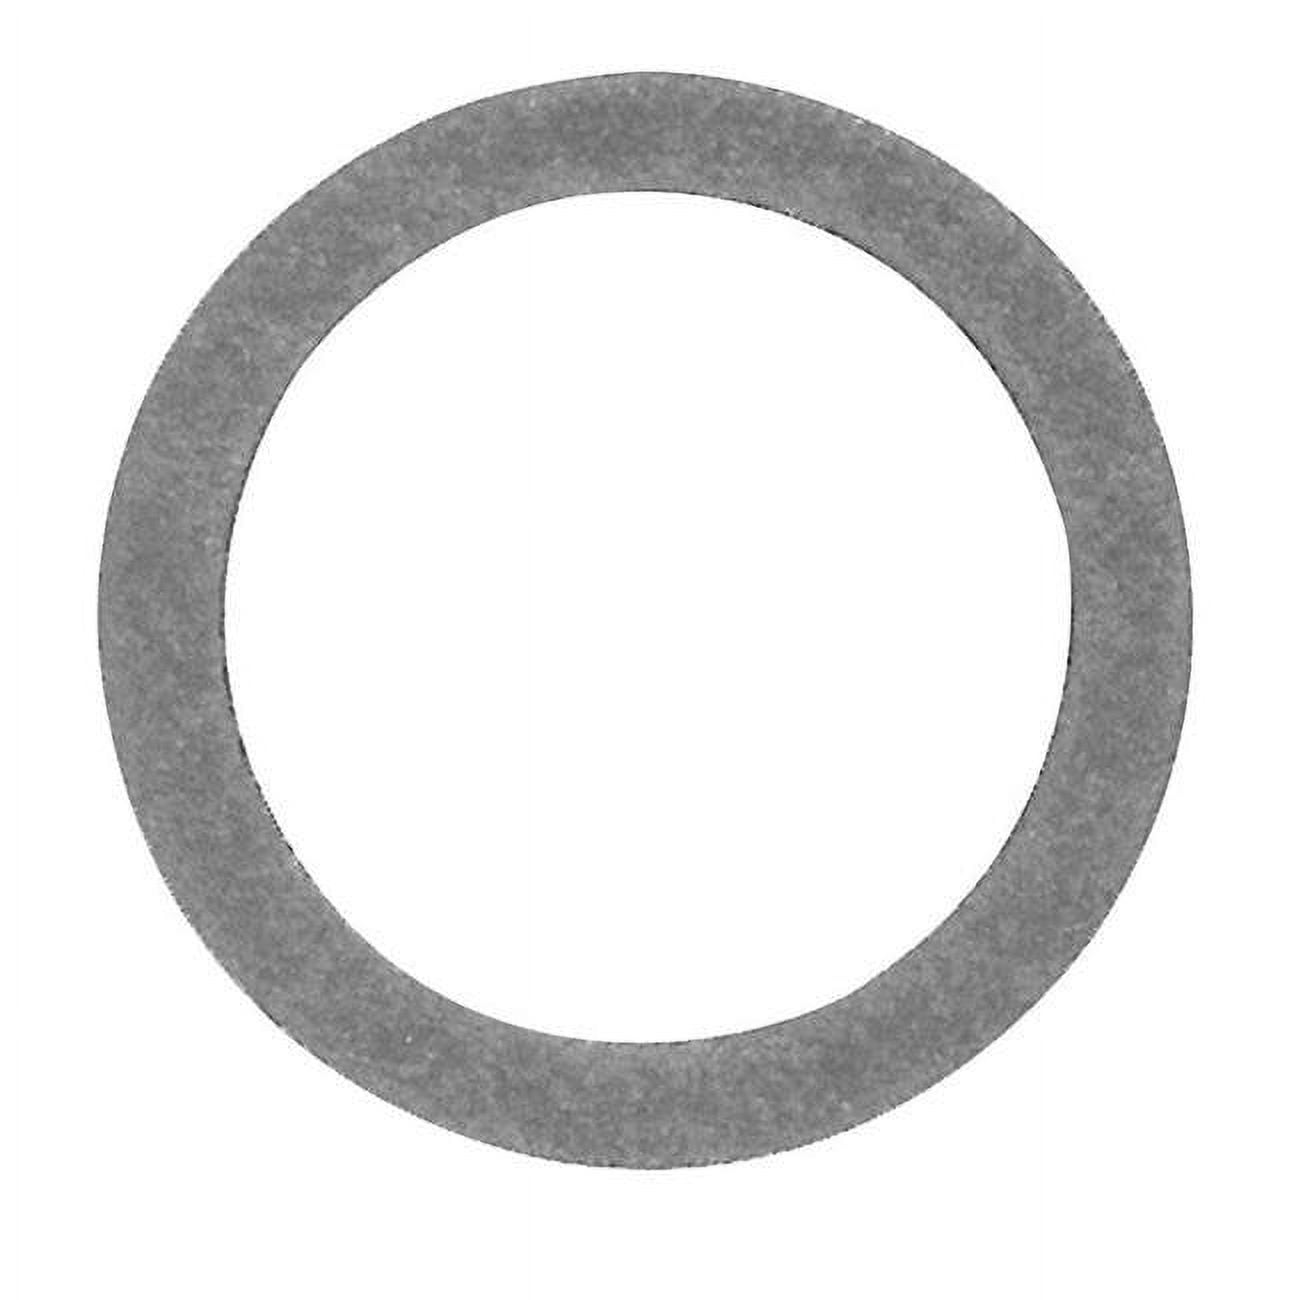 Picture of Danco 35567B No.32 Cap Thread Gasket- pack of 5